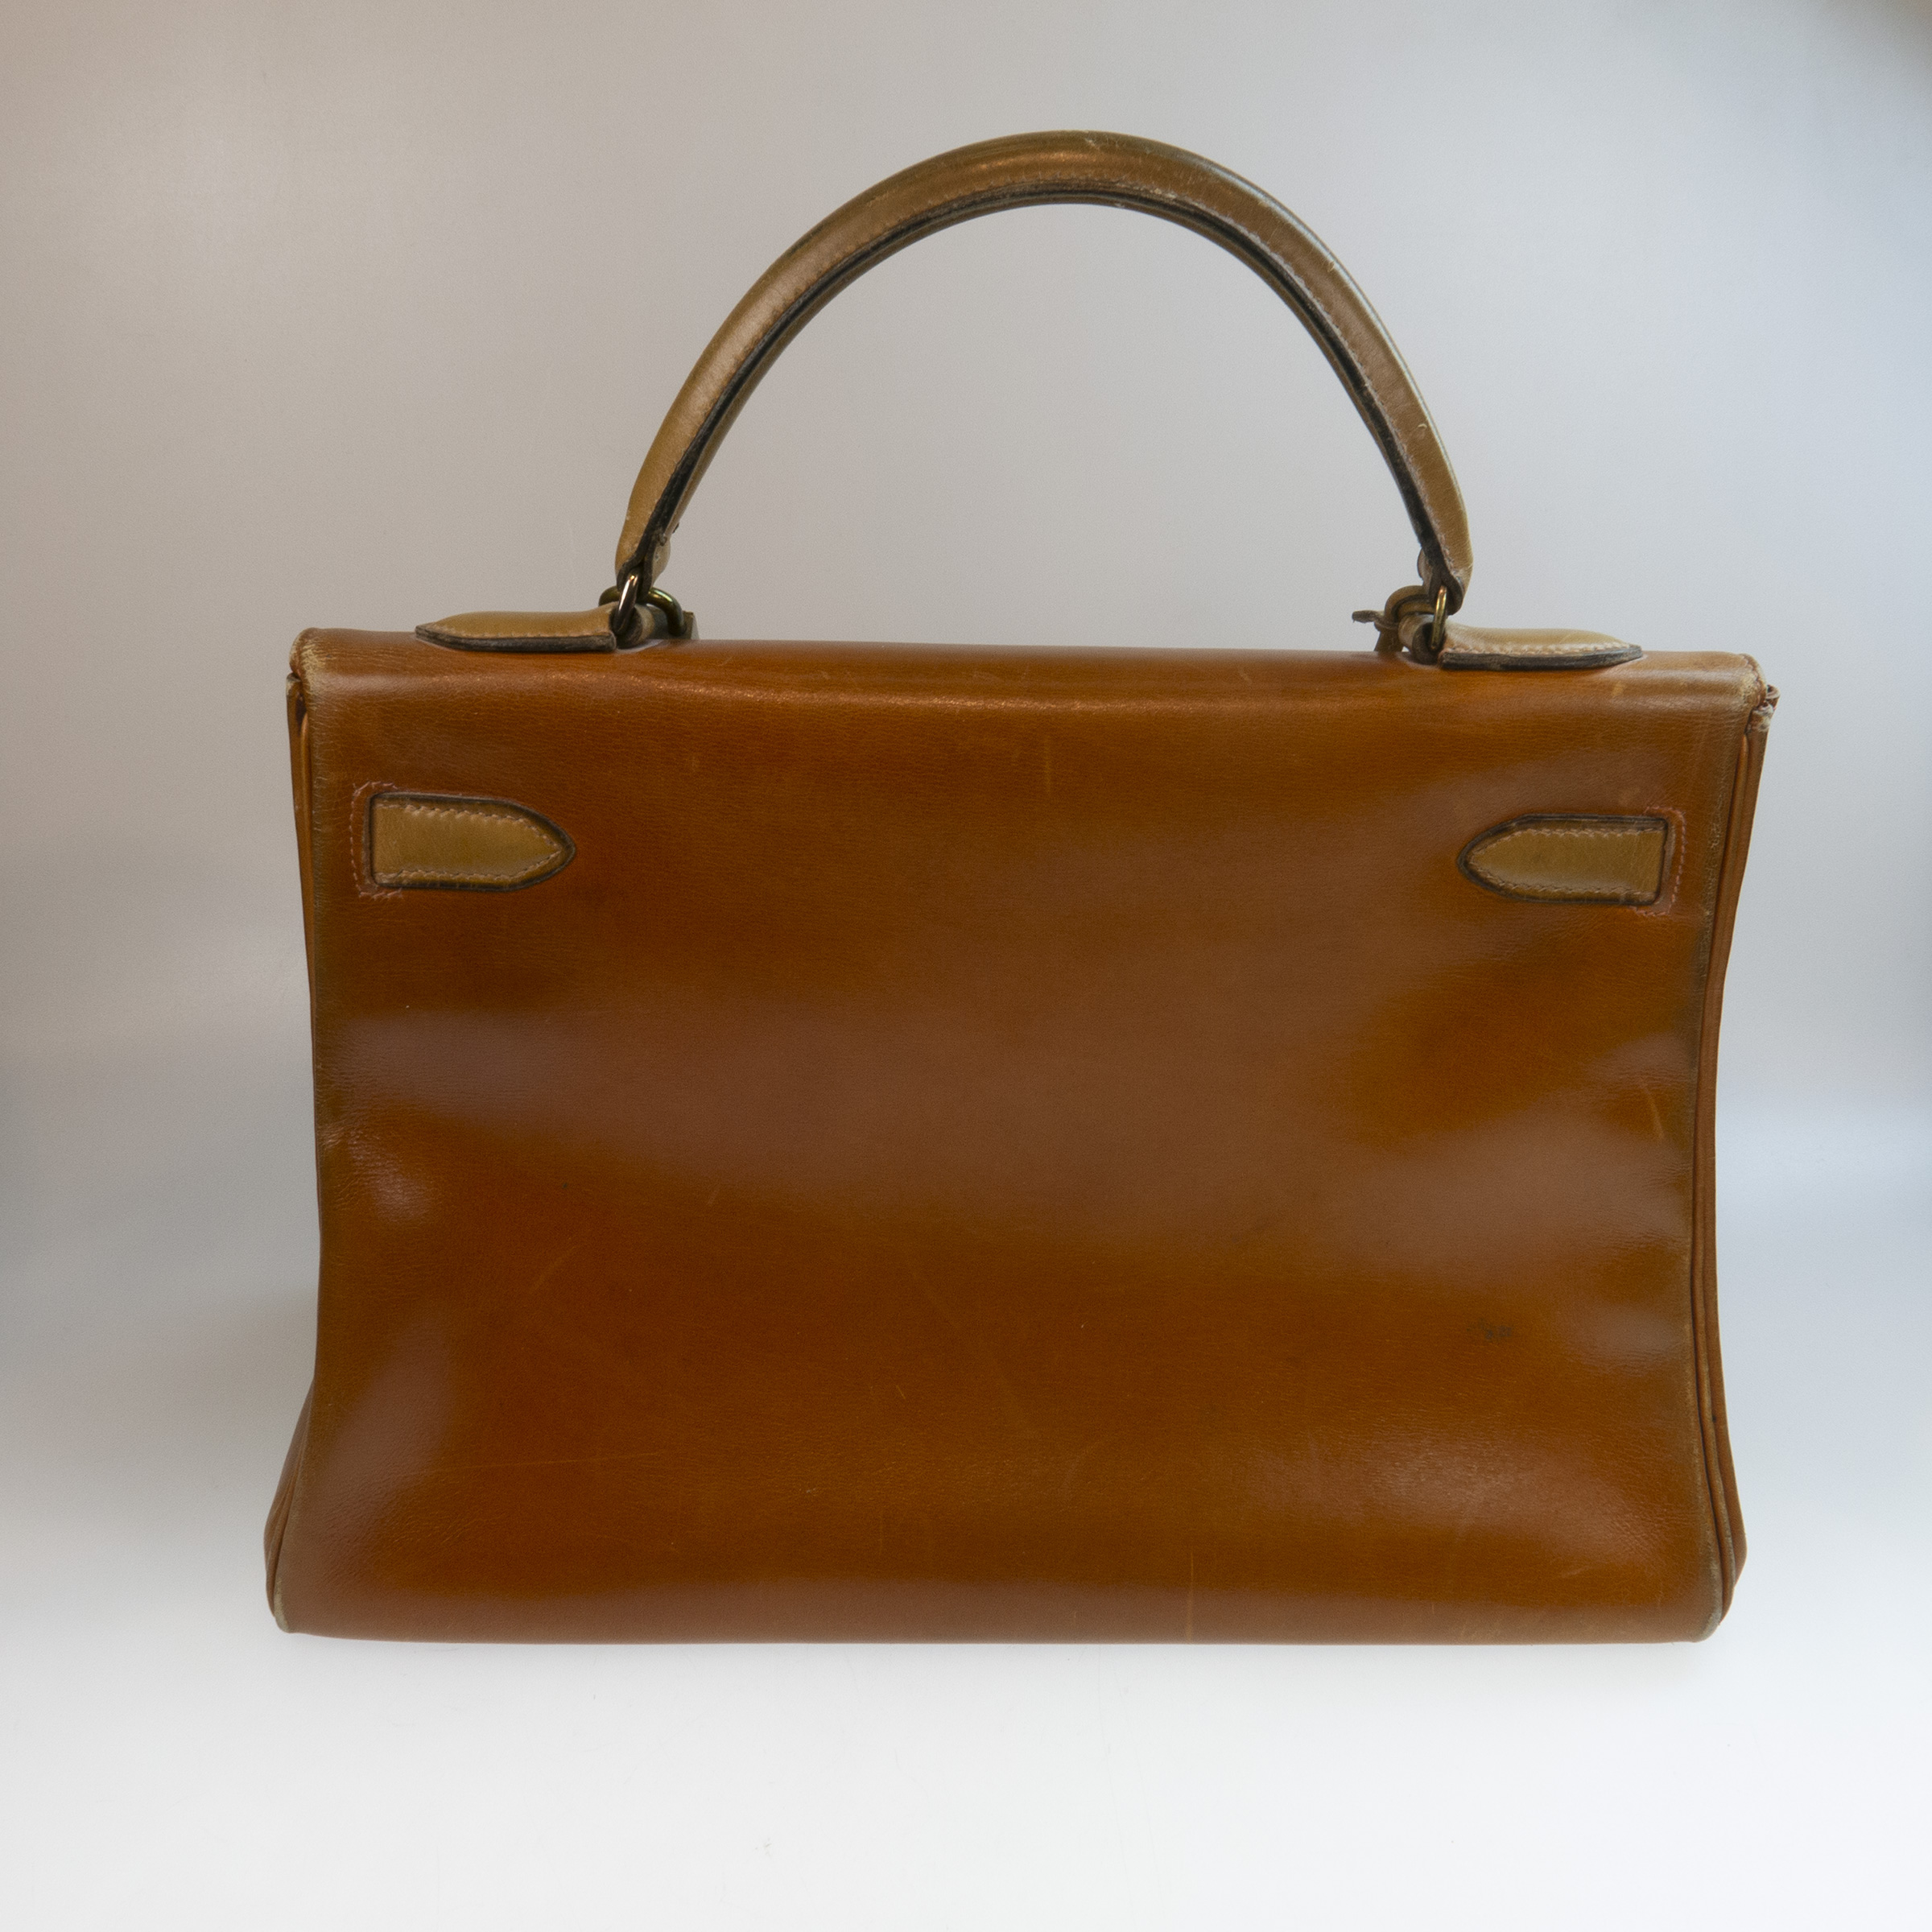 Hermes Kelly Top Handle Gold Leather Bag